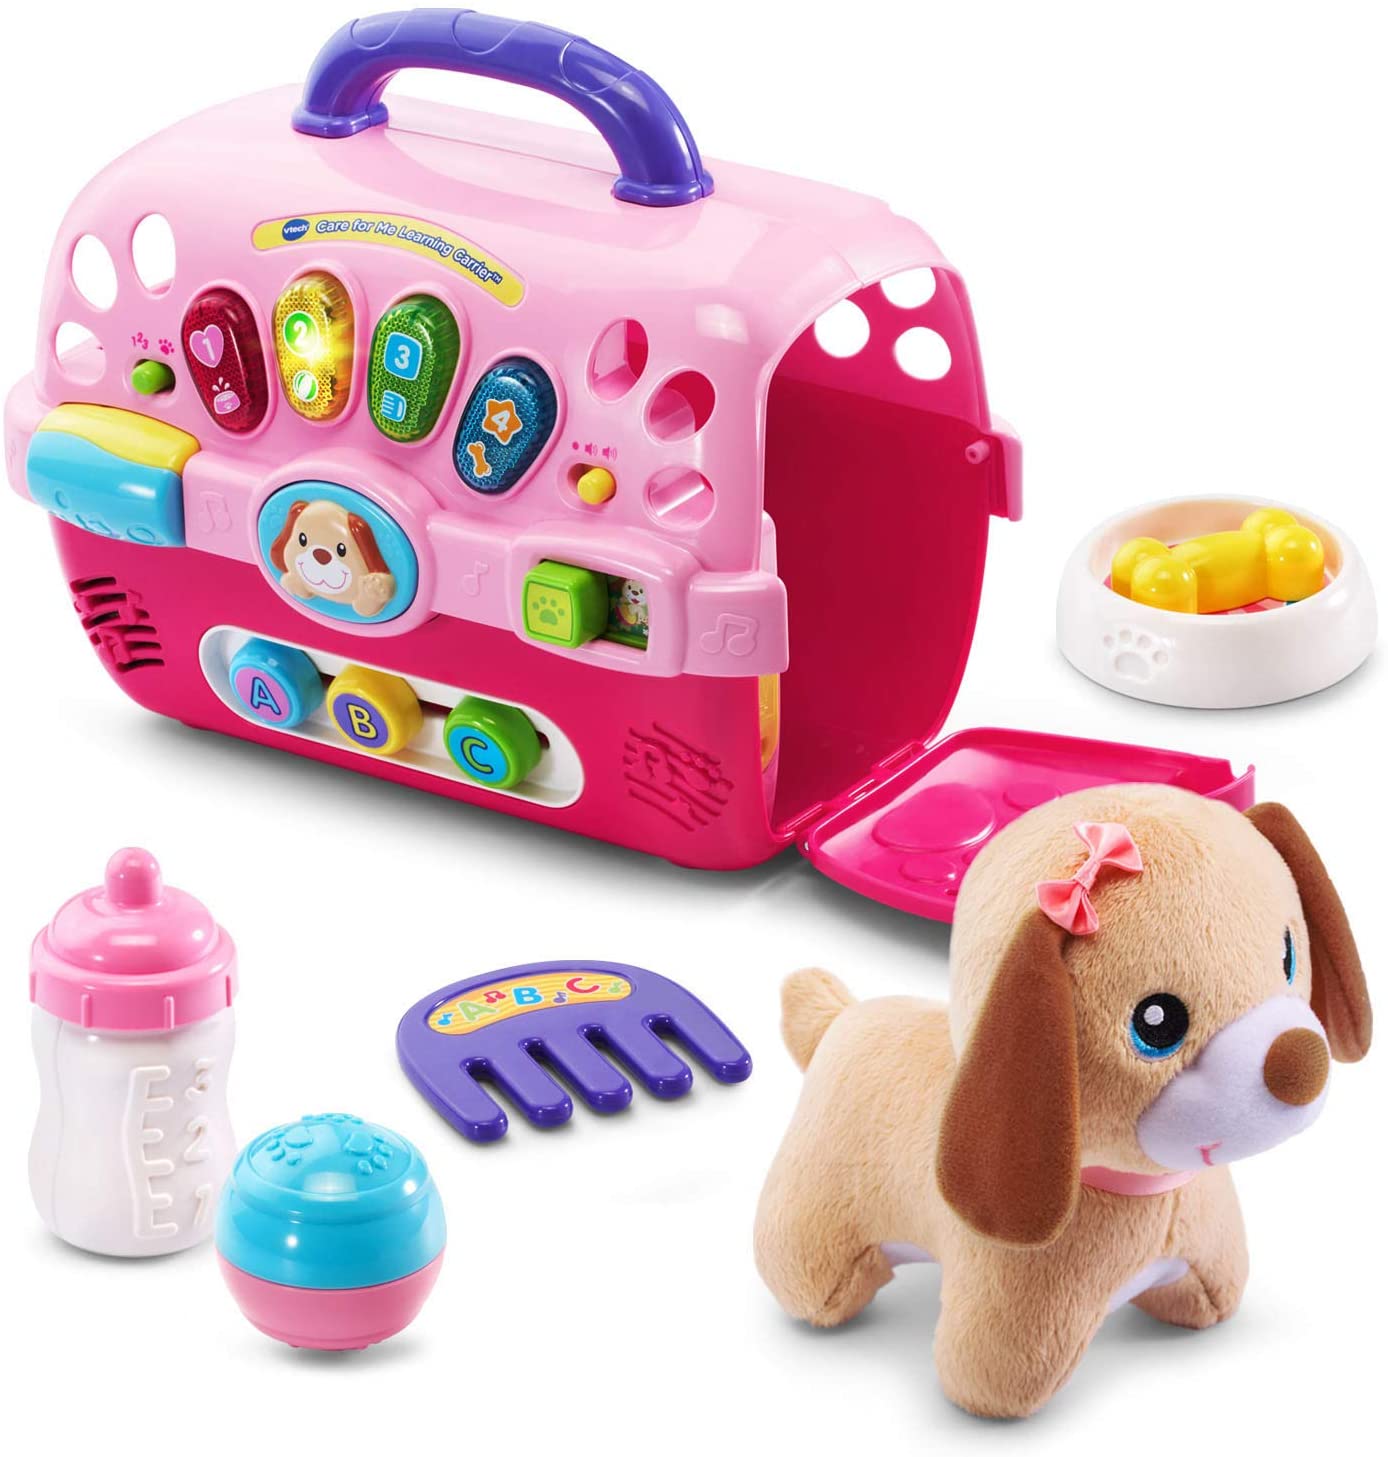 VTech Care for Me Learning Carrier, Pink - Features 100+ songs, melodies, sounds and phrases